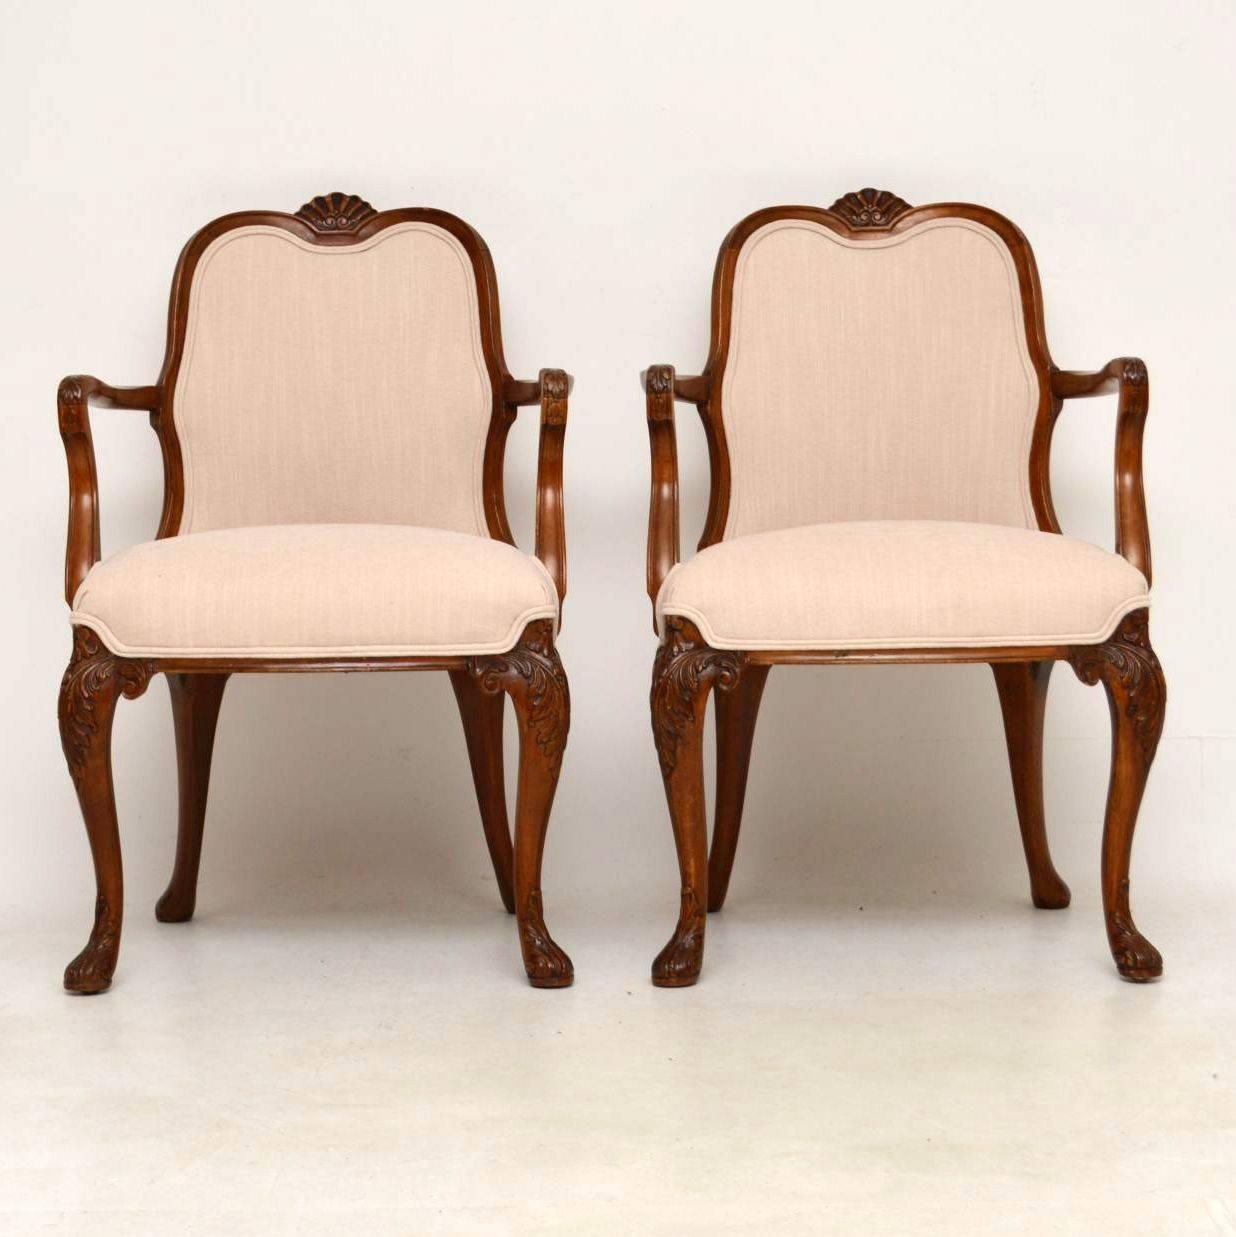 Pair of high quality solid walnut upholstered open armchairs in good condition and dating from the 1910s-1920s period. They are very much Queen Anne design with the typical carvings and the shepherds crook arms. They have shell carvings on the tops